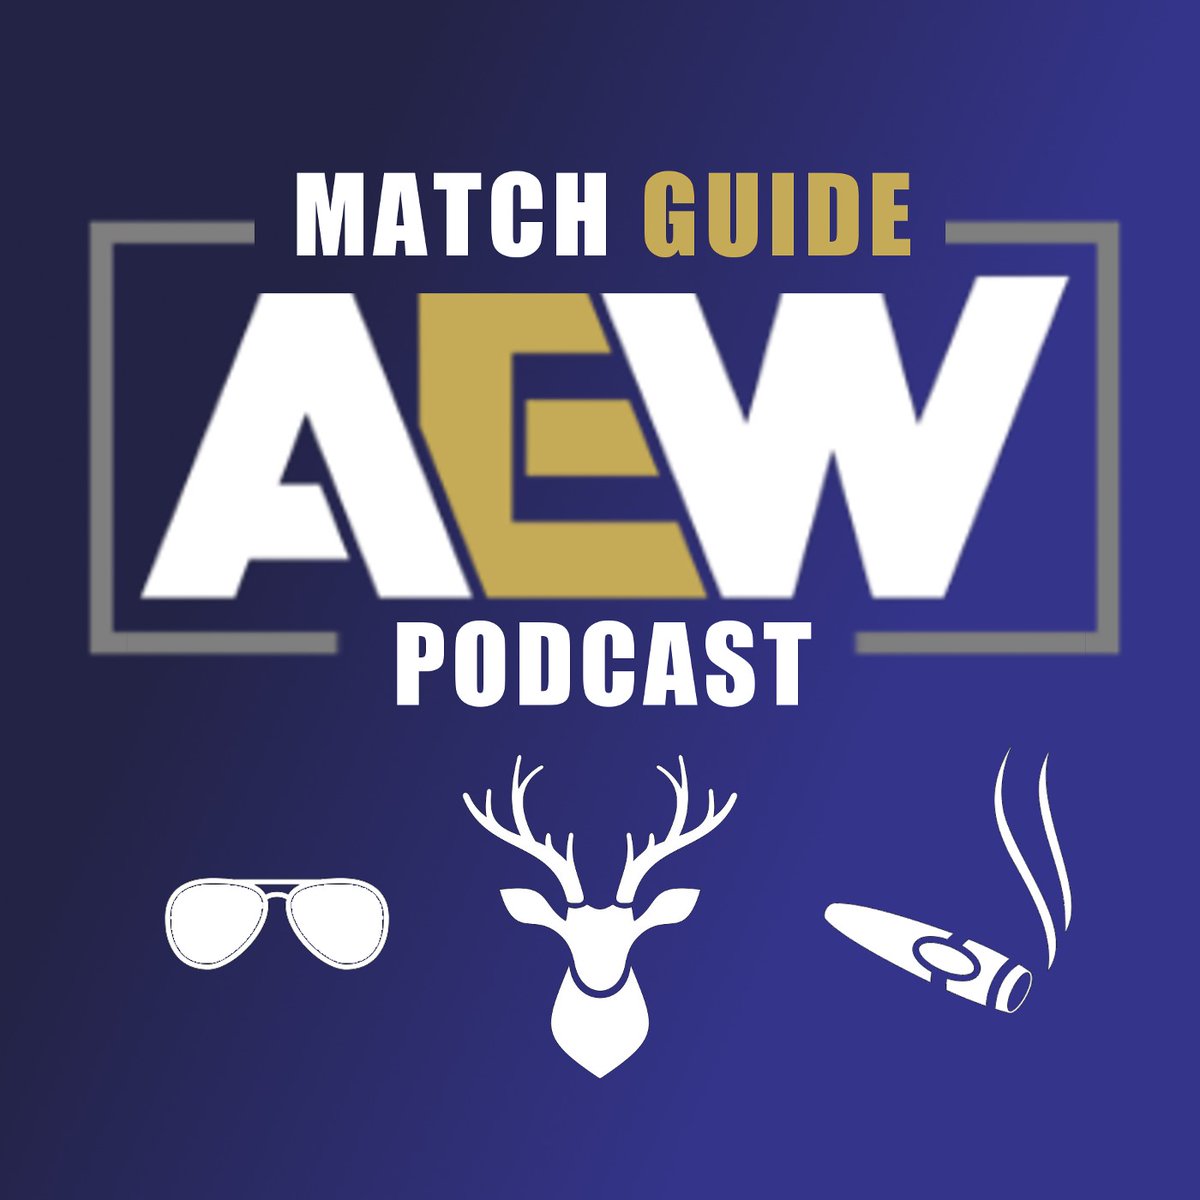 The AEW Match Guide is coming back for a special celebration of AEW's fifth anniversary. We'll be creating a list of AEW's greatest ever matches! If you've been involved in the past or would like to vote please let me know and I'll send you a ballot.